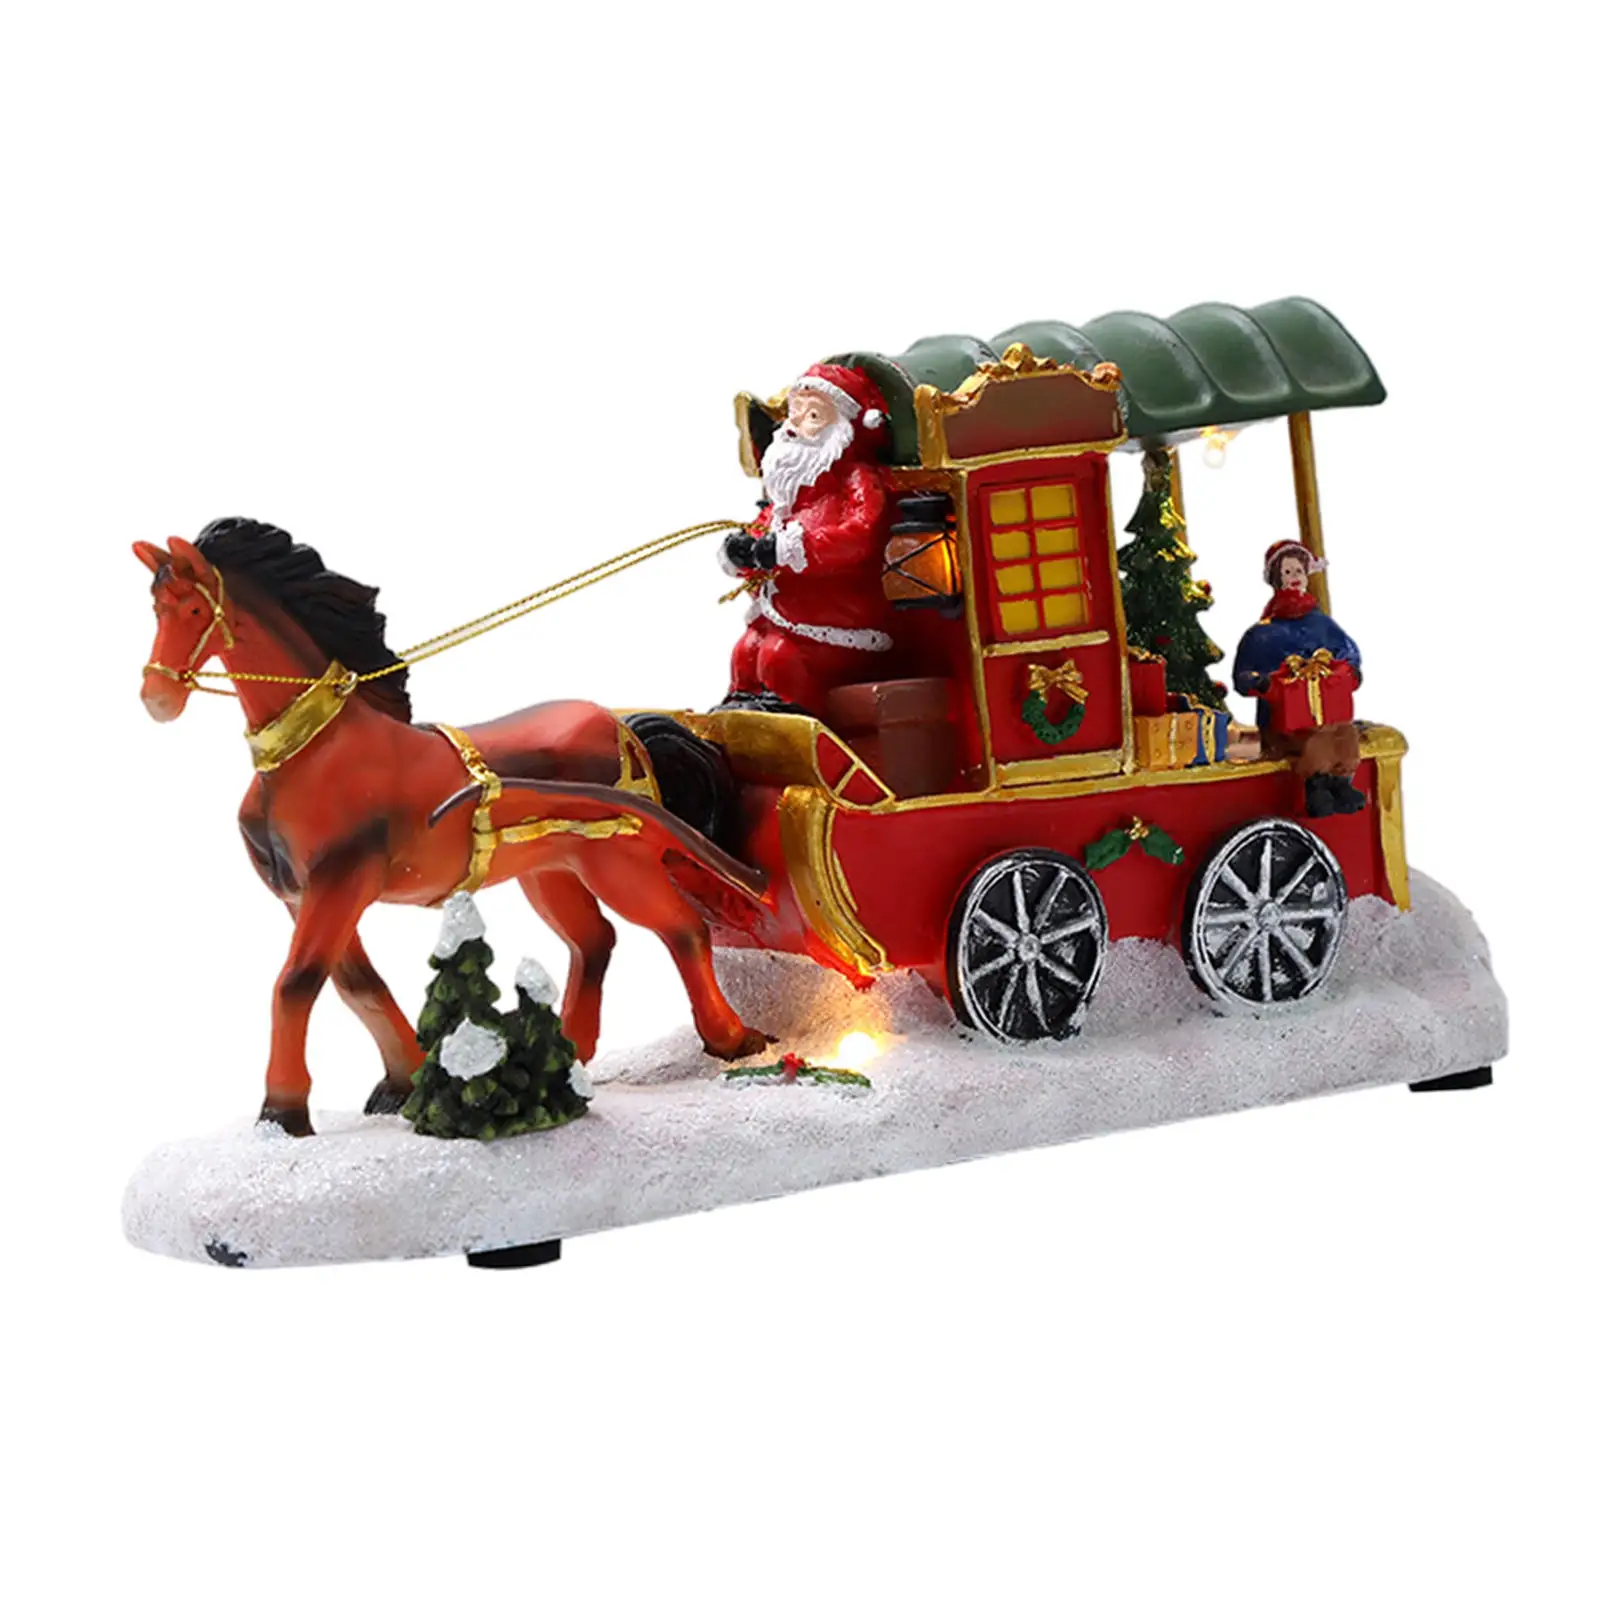 11 Inch Santa with Sleigh Multicolor Figurine Music Xmas Decoration for Home